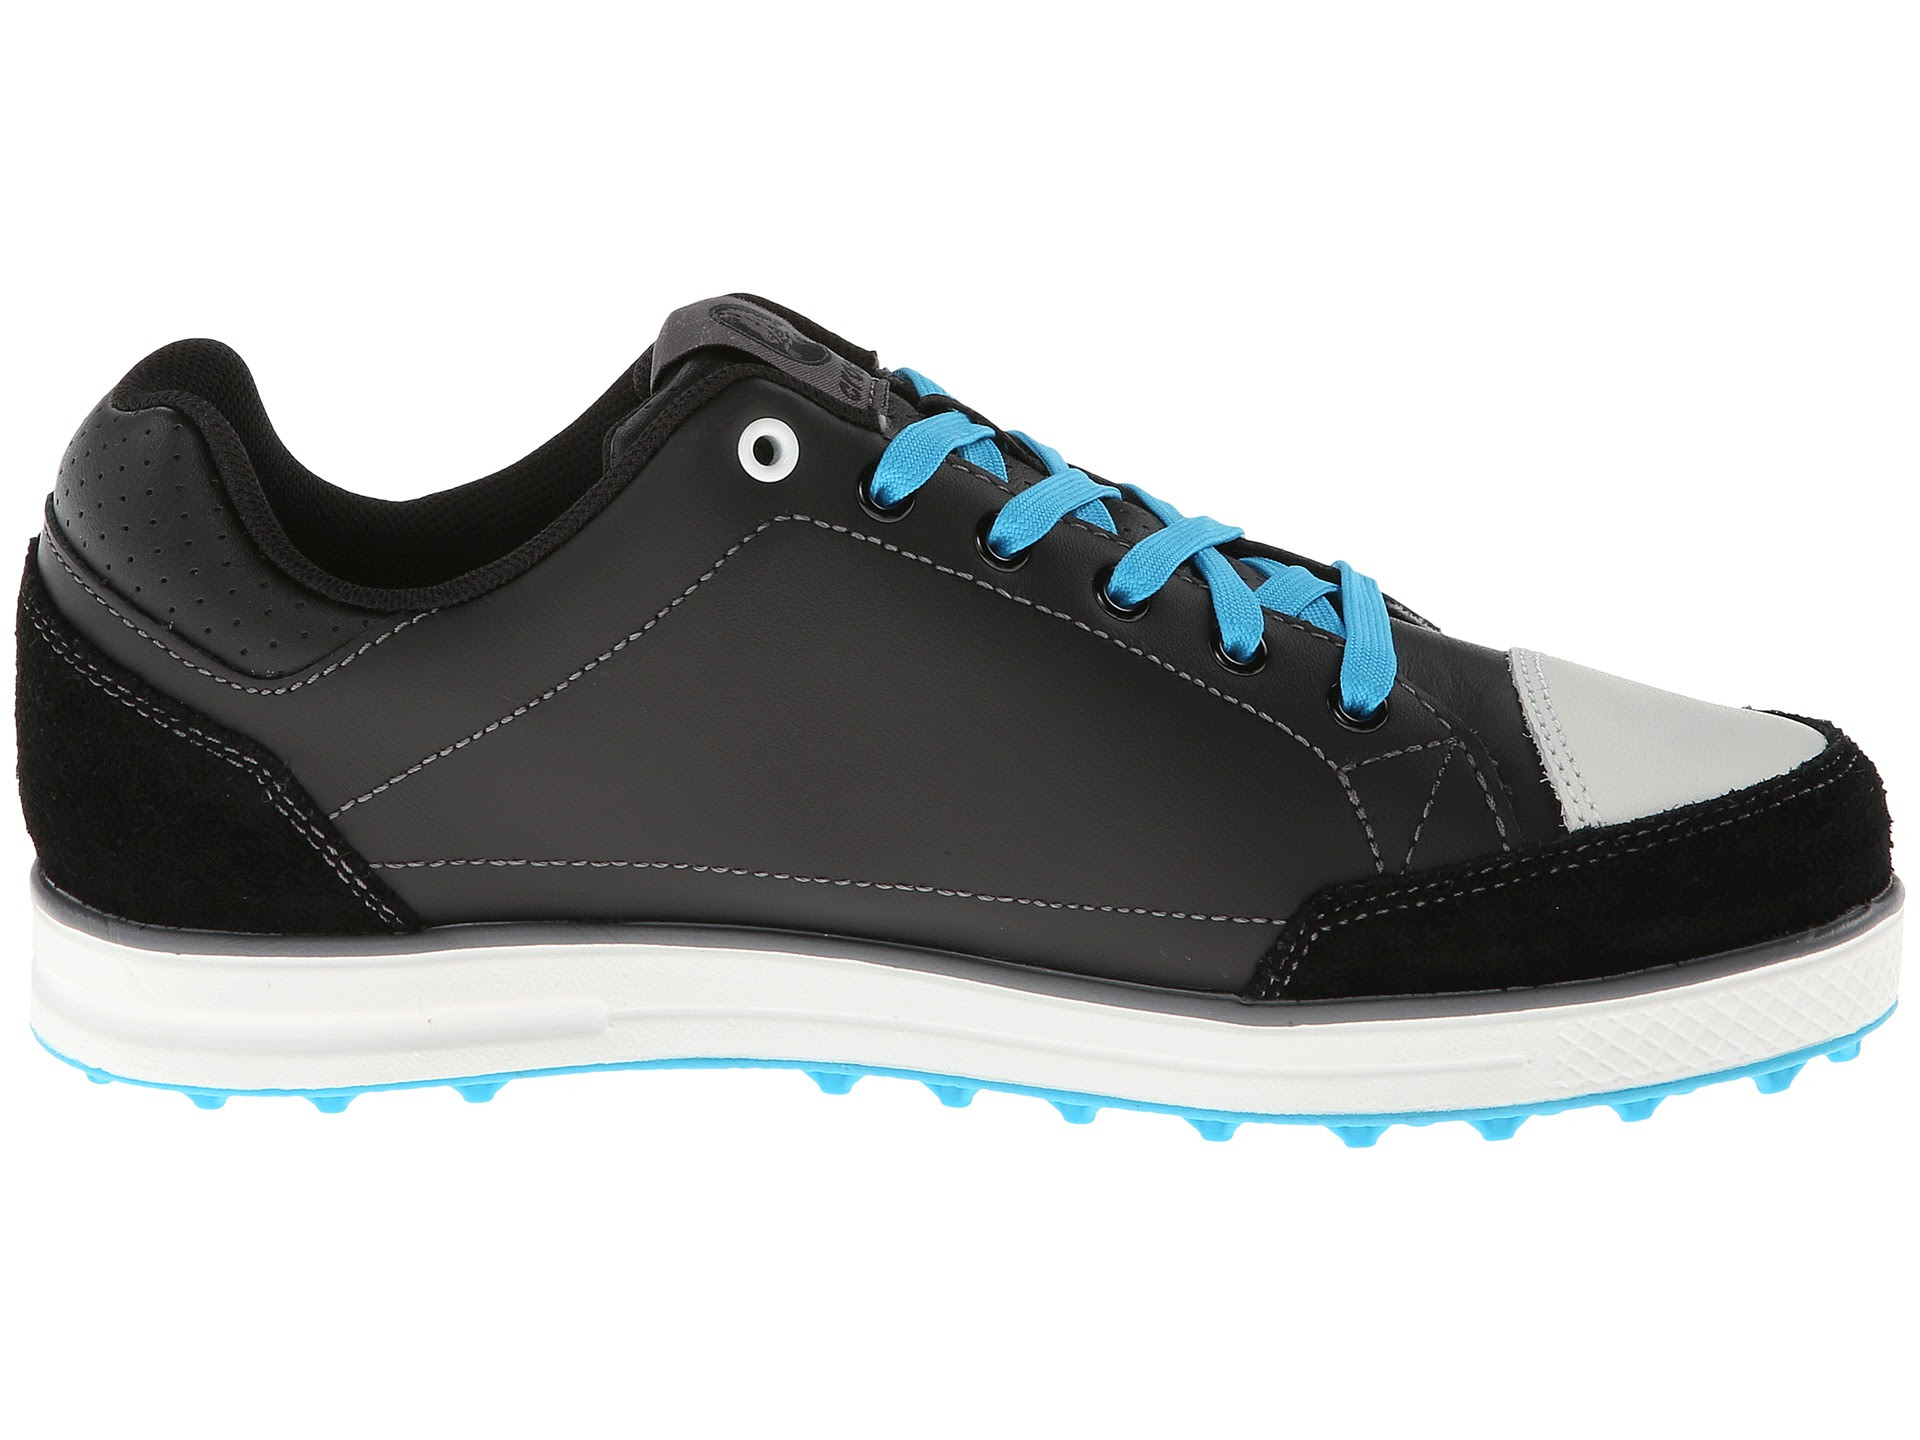 Naturalizer Sandals: Zappos Golf Shoes